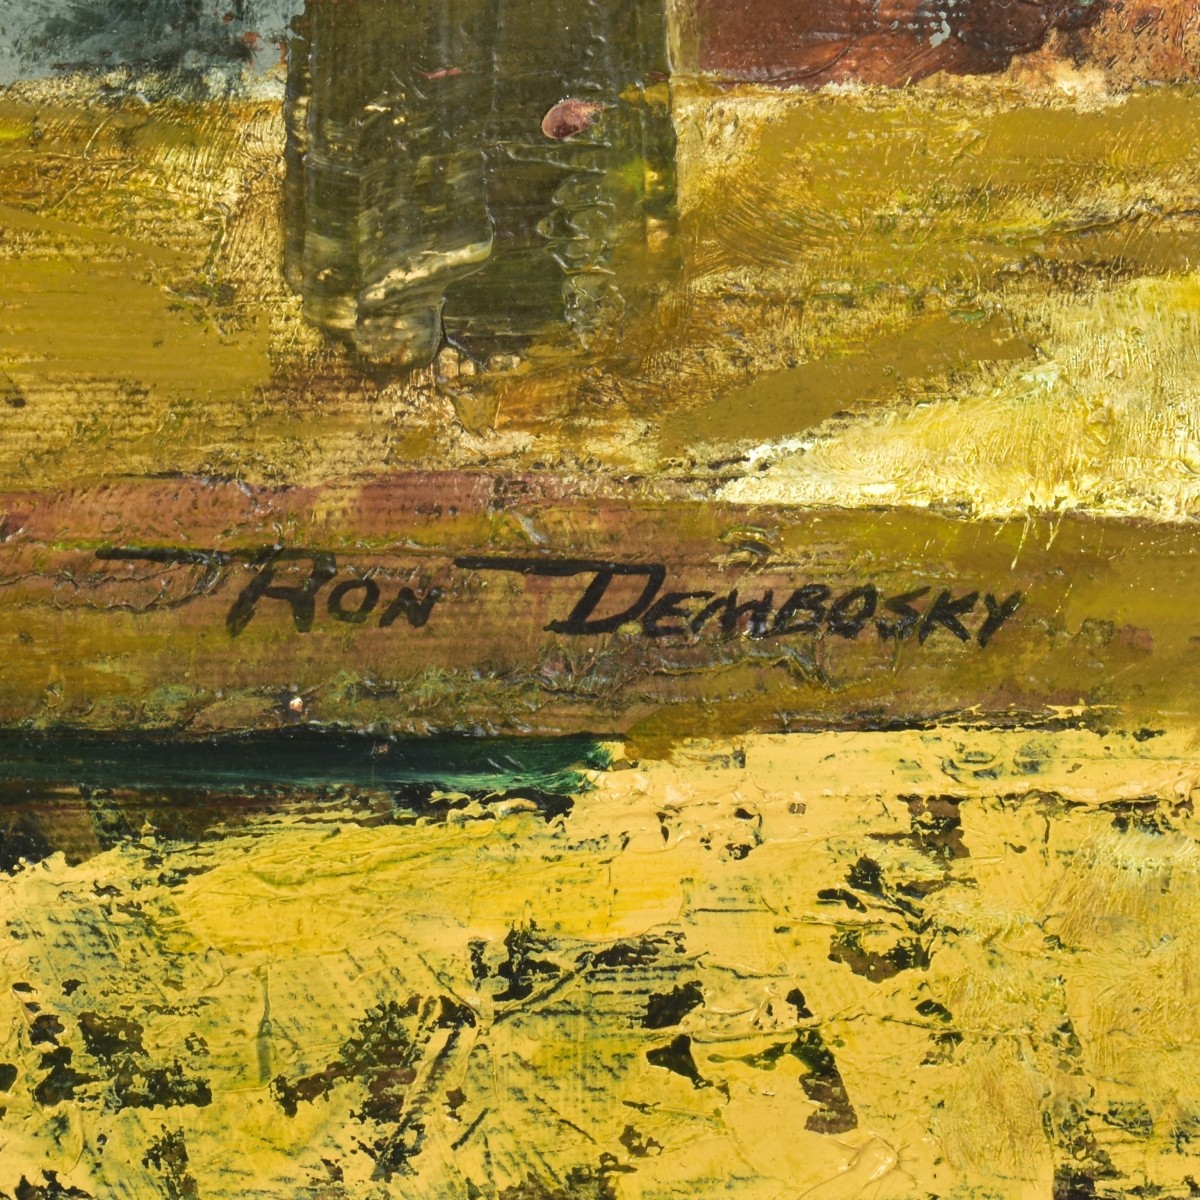 Ron Dembosky, American (1934 - 1996)